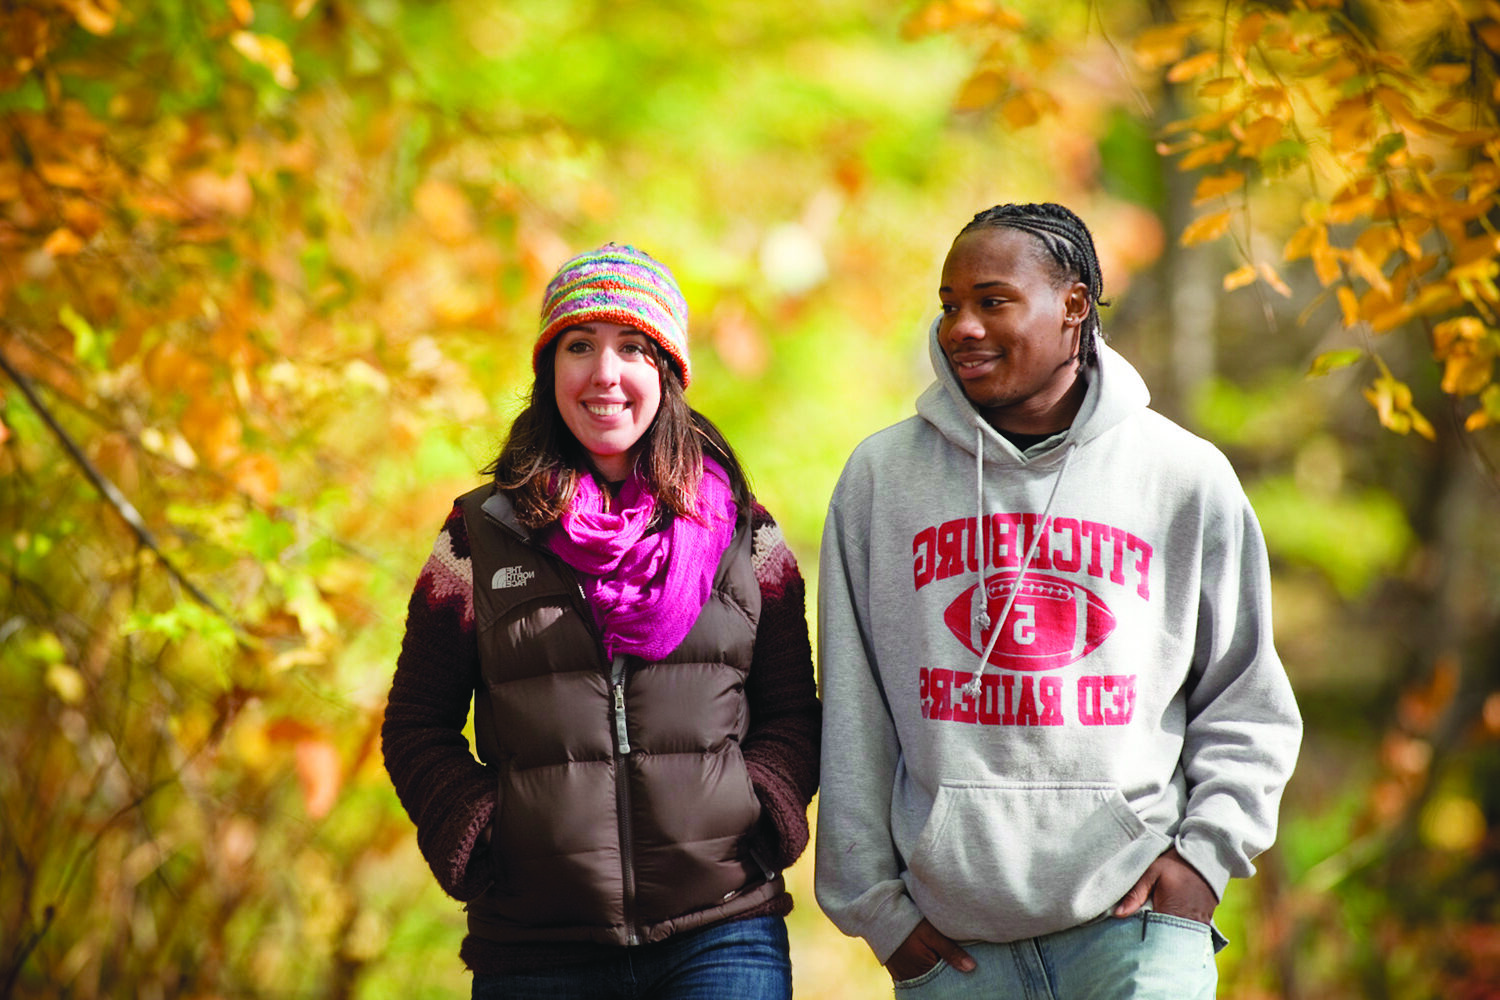 Two smiling people walking down a path outdoors surrounded by fall foliage